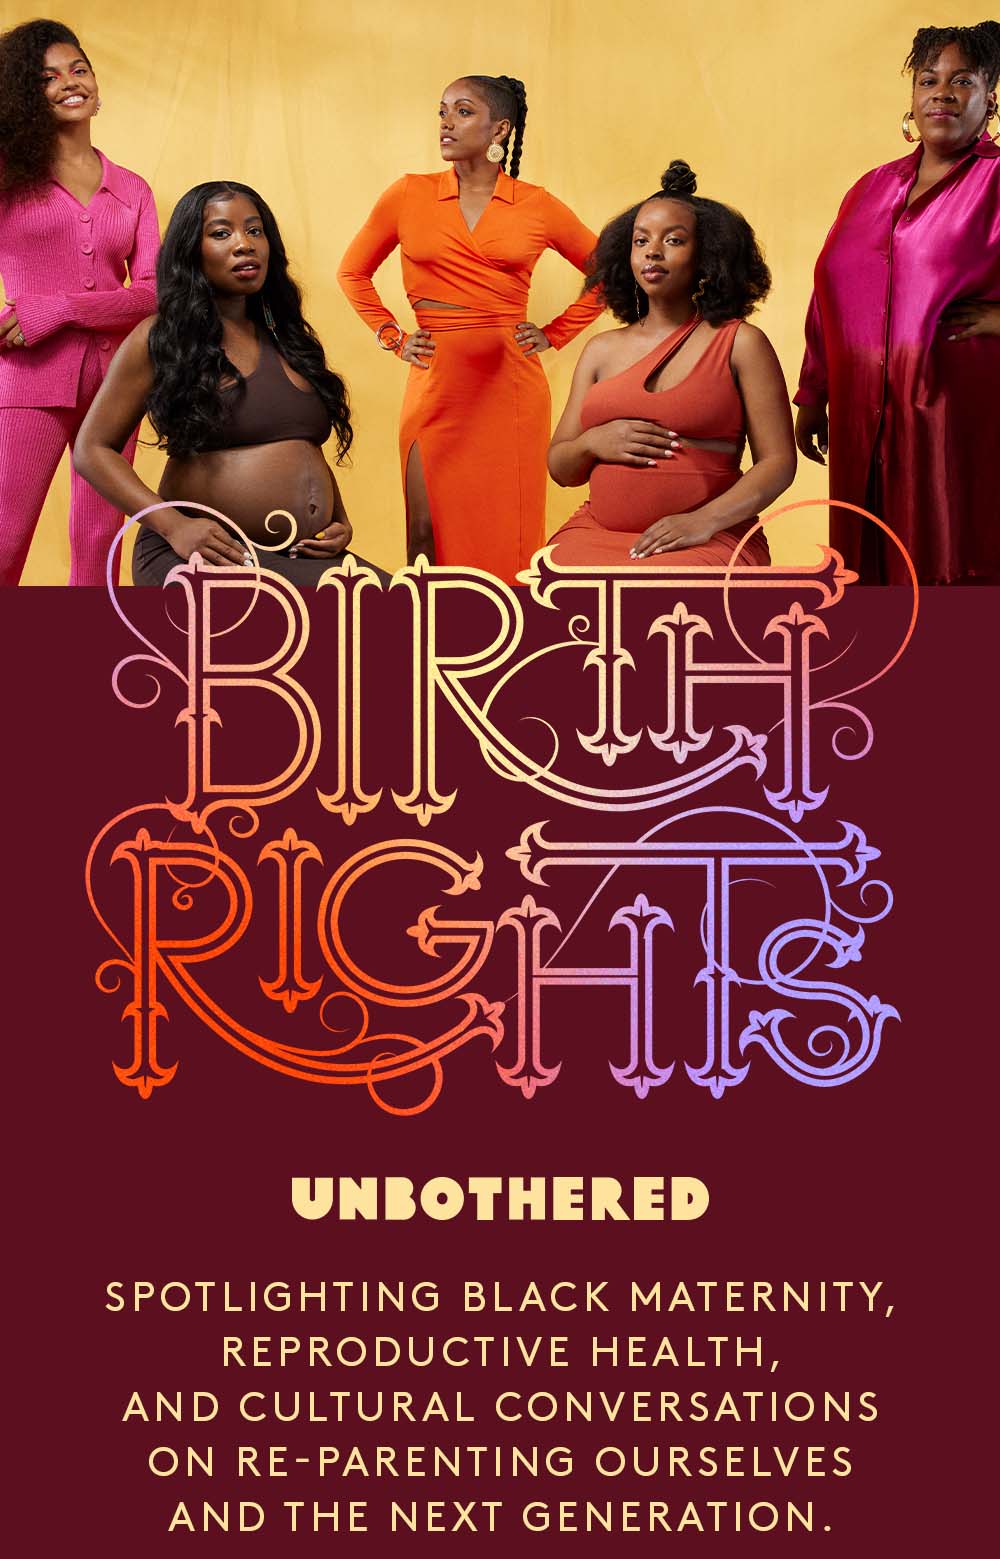 Birth Rights. Unbothered. Spotlighting Black maternity, reproductive health, and cultural conversations on re-parenting ourselves and the next generation.